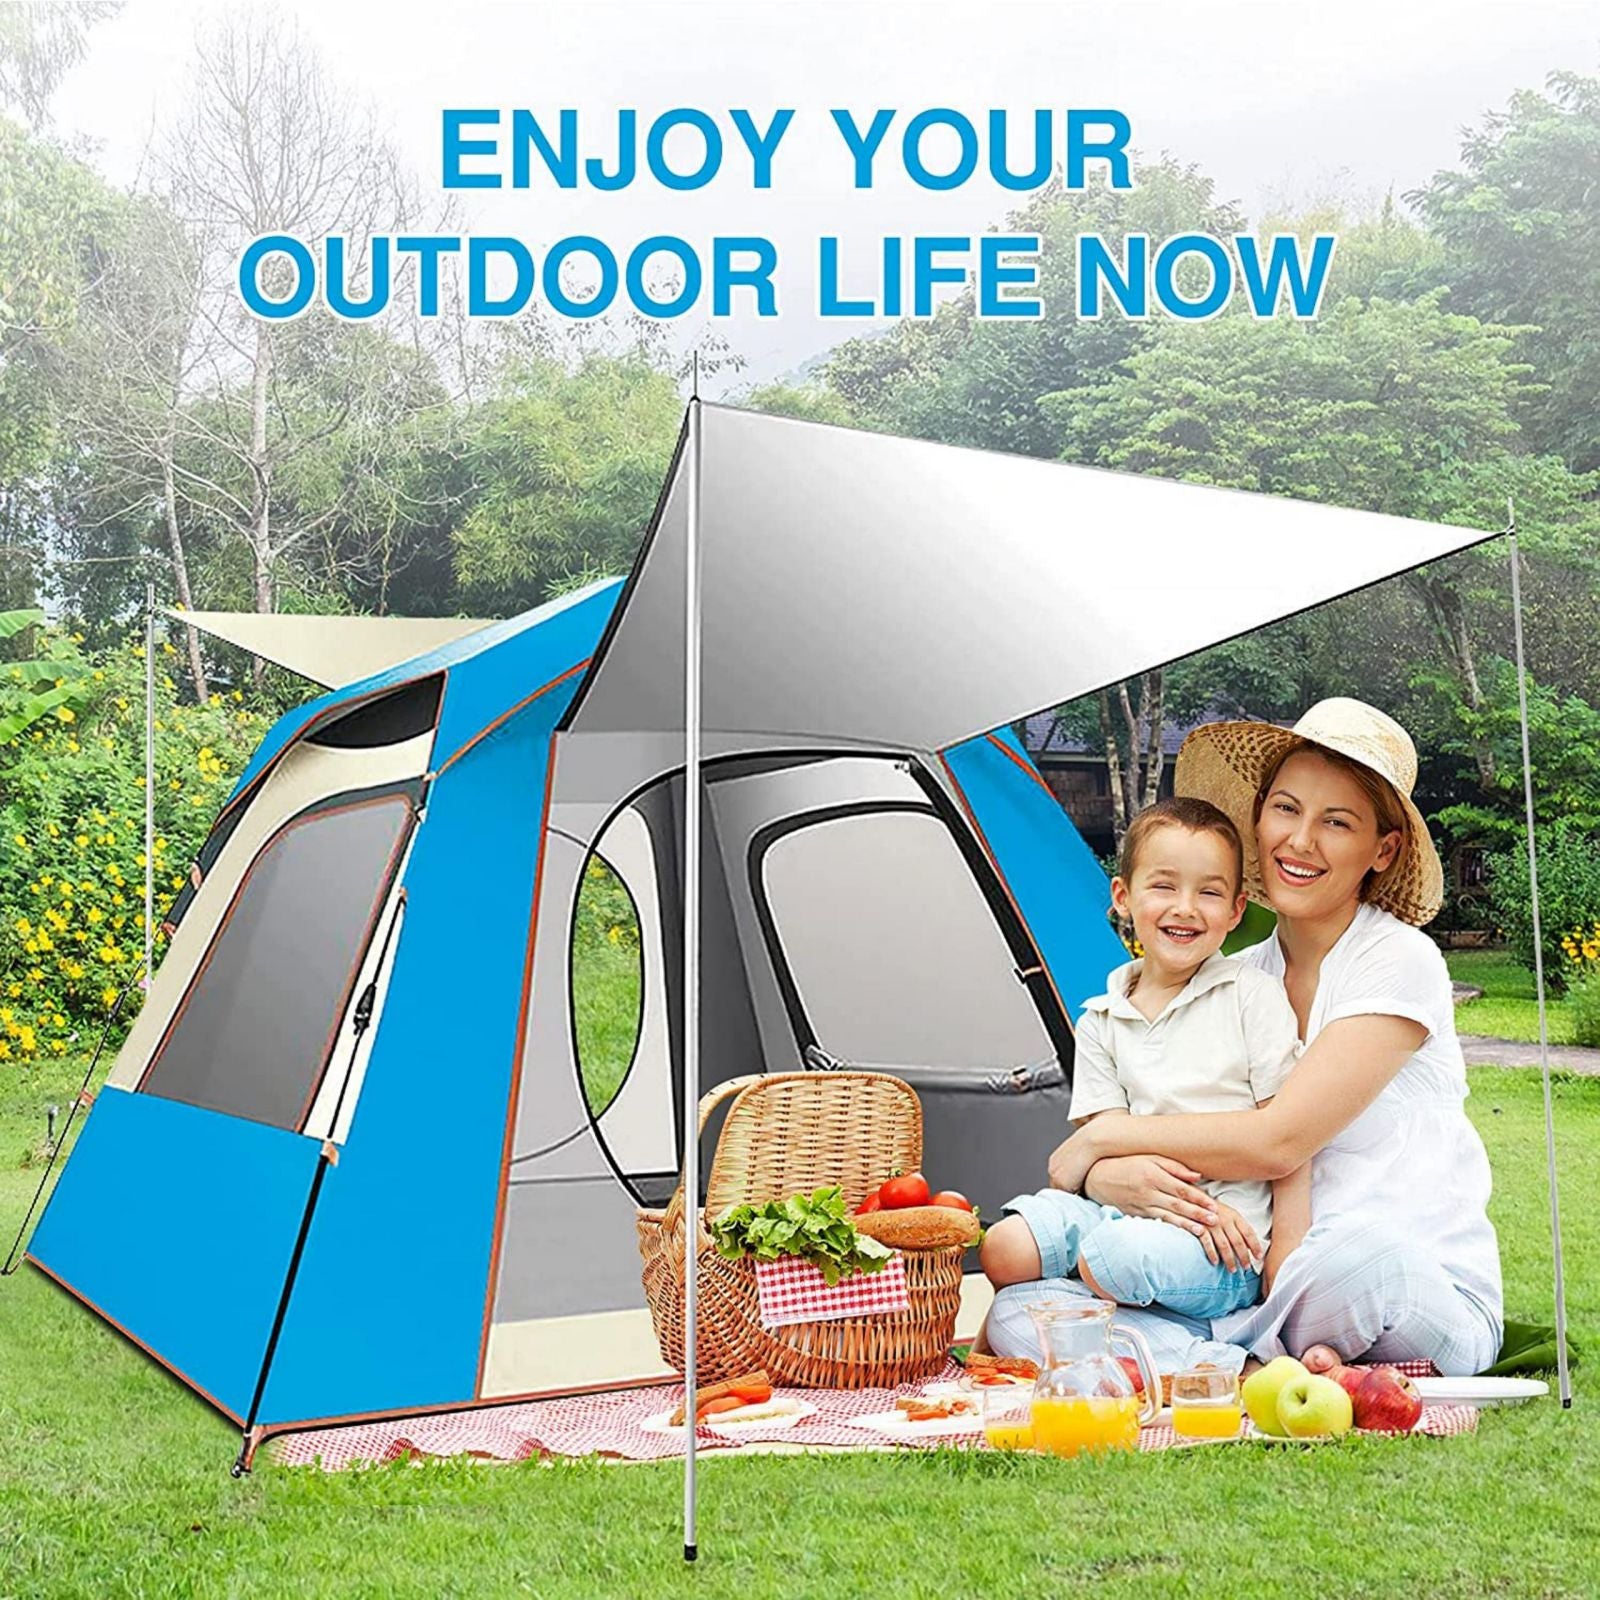 Instant Pop Up Tent For Hiking 2/3/4 Person Camping Tents, Waterproof Windproof Family Tent With Top Rainfly, Easy Set Up, Portable With Carry Bag, With UV Protection  / BLUE - SILBERSHELL